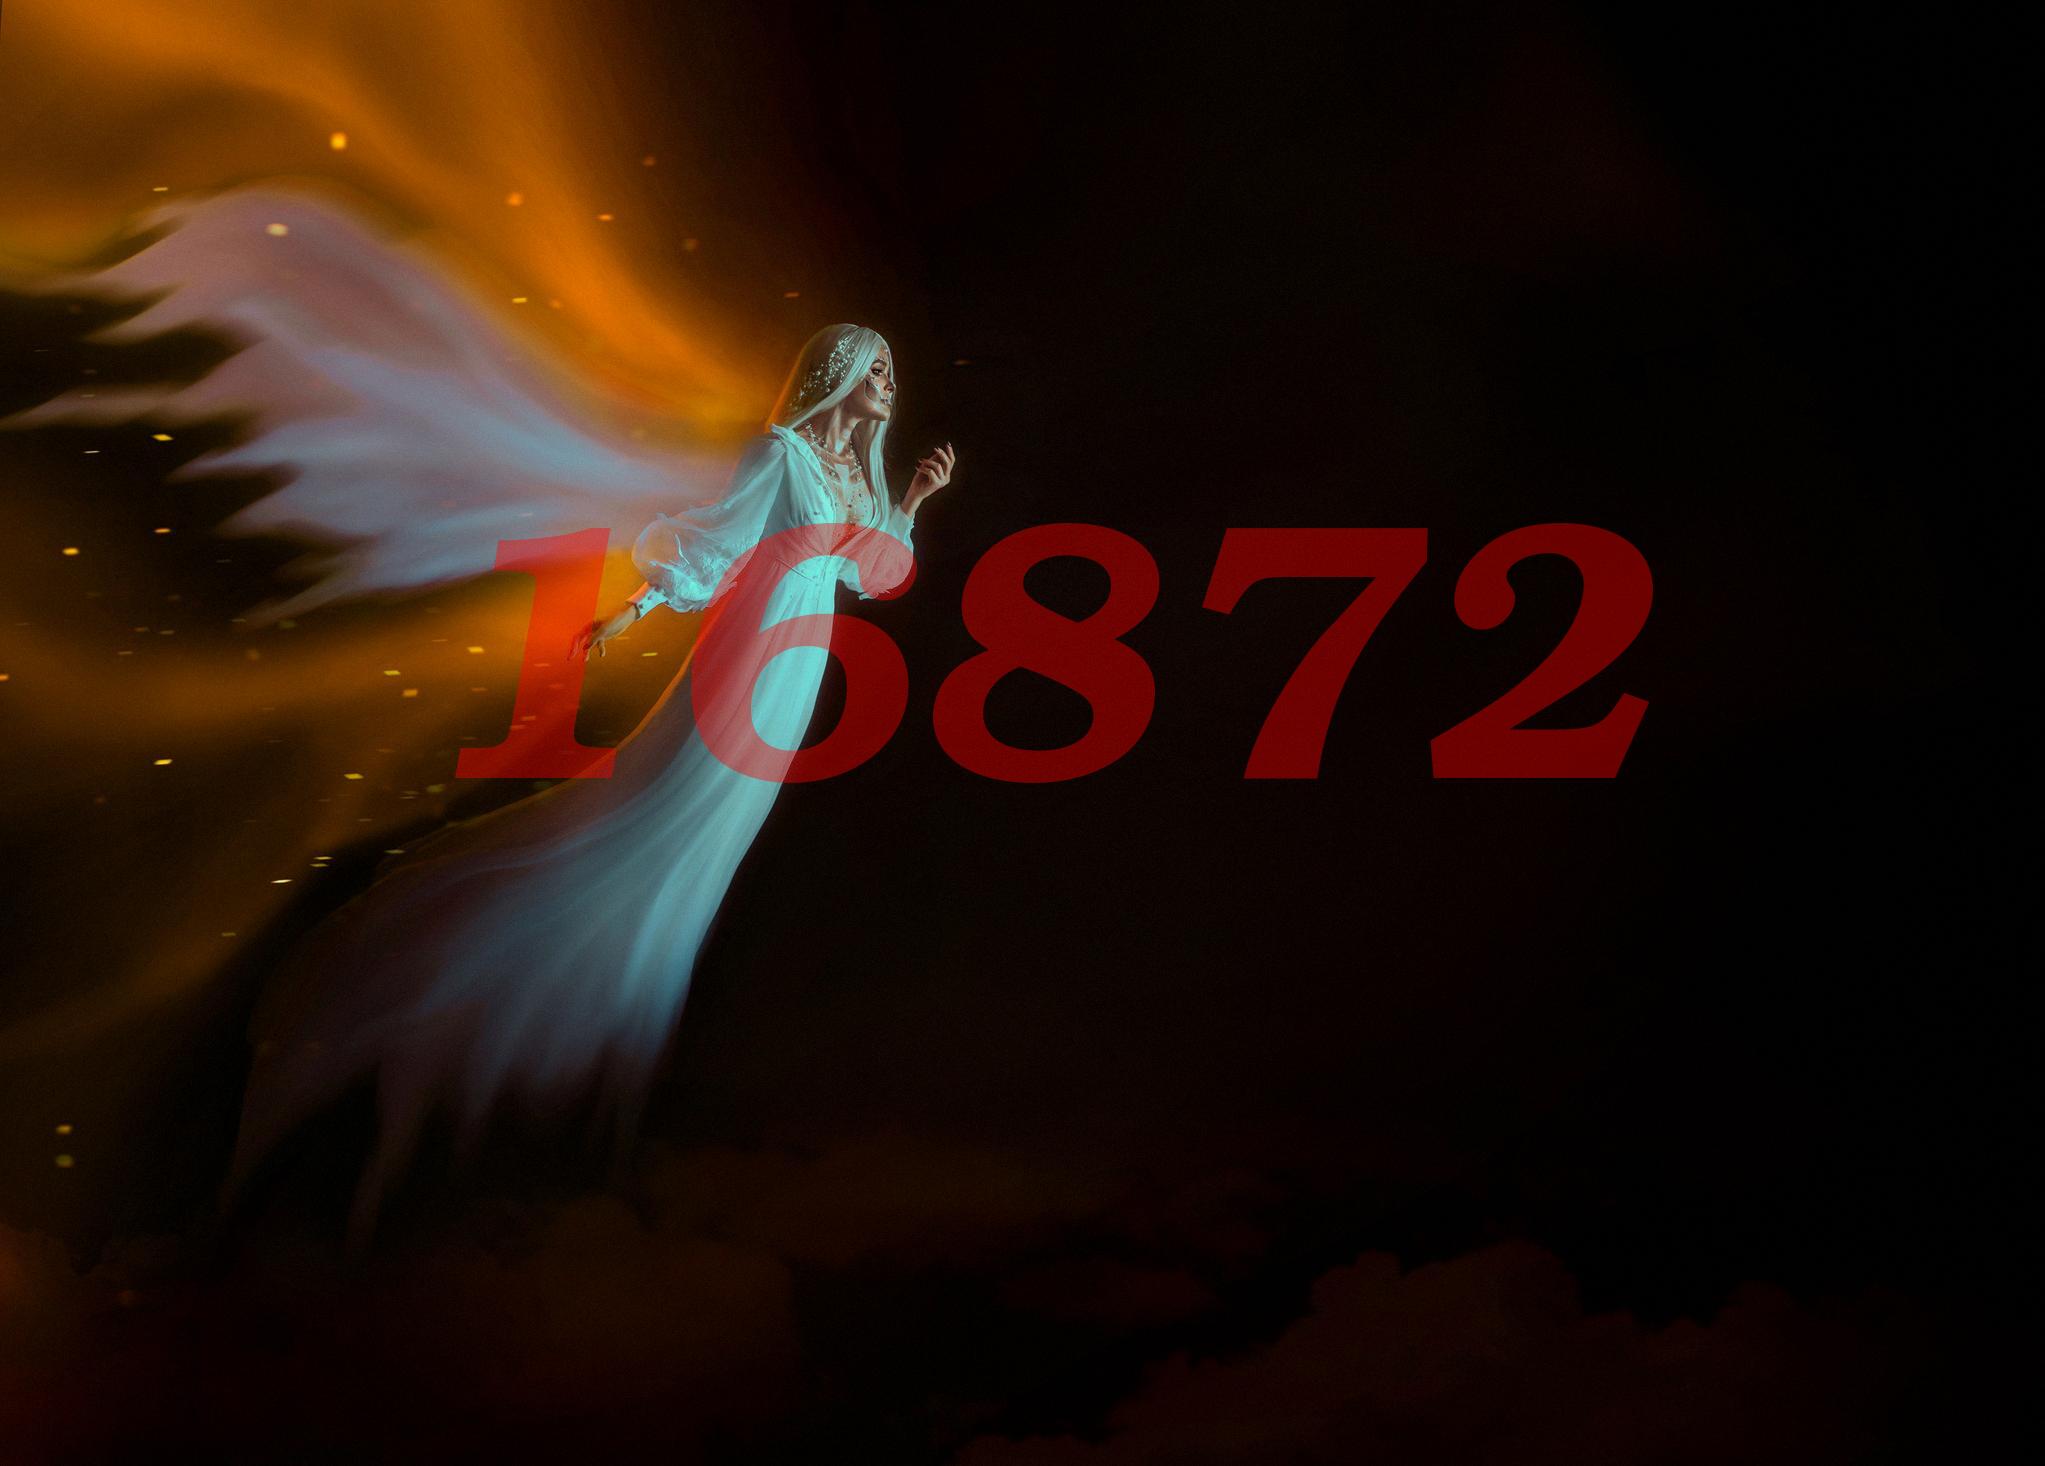 What Is The Spiritual Significance Of The 16872 Angel Number? -  TheReadingTub